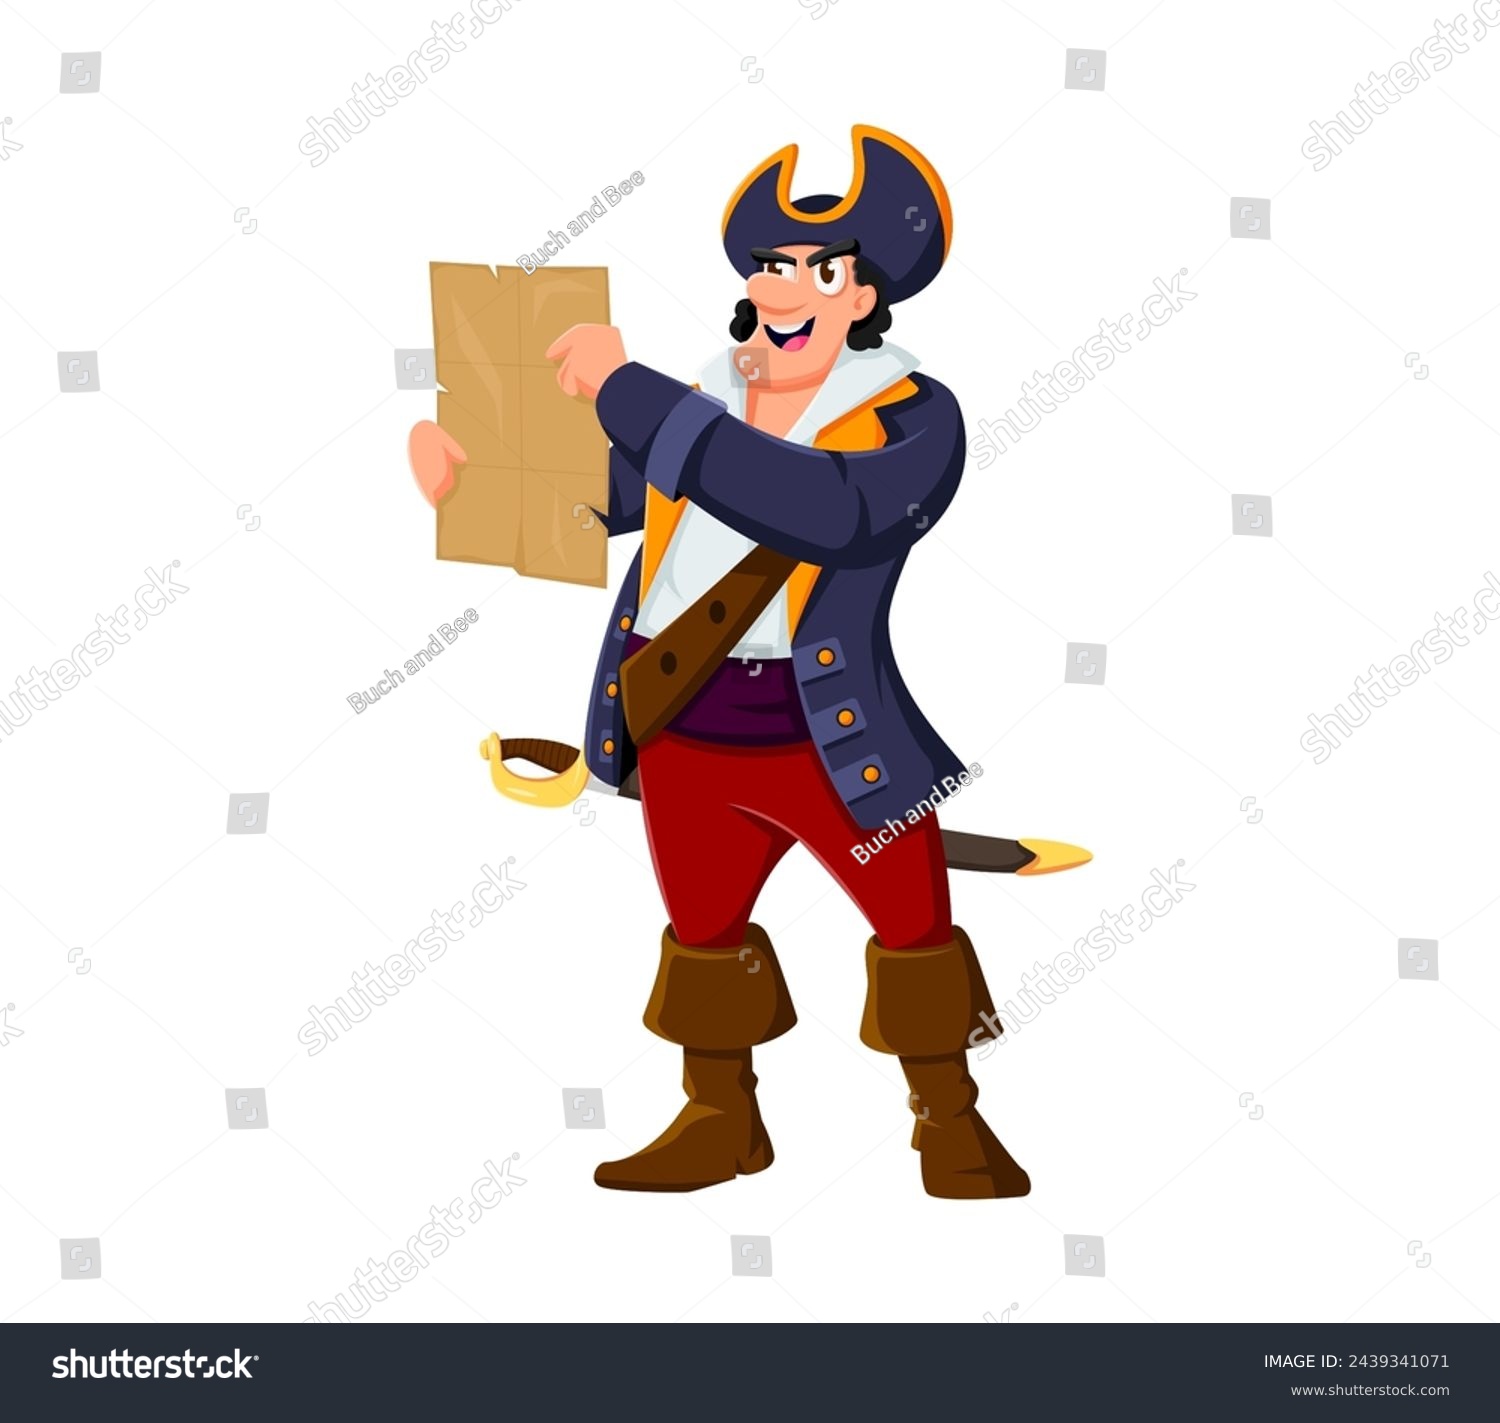 SVG of Cartoon pirate and corsair captain character with treasure map. Isolated vector buccaneer in tricorn hat clutches a weathered parchment, eyes gleaming with anticipation for buried riches and adventure svg